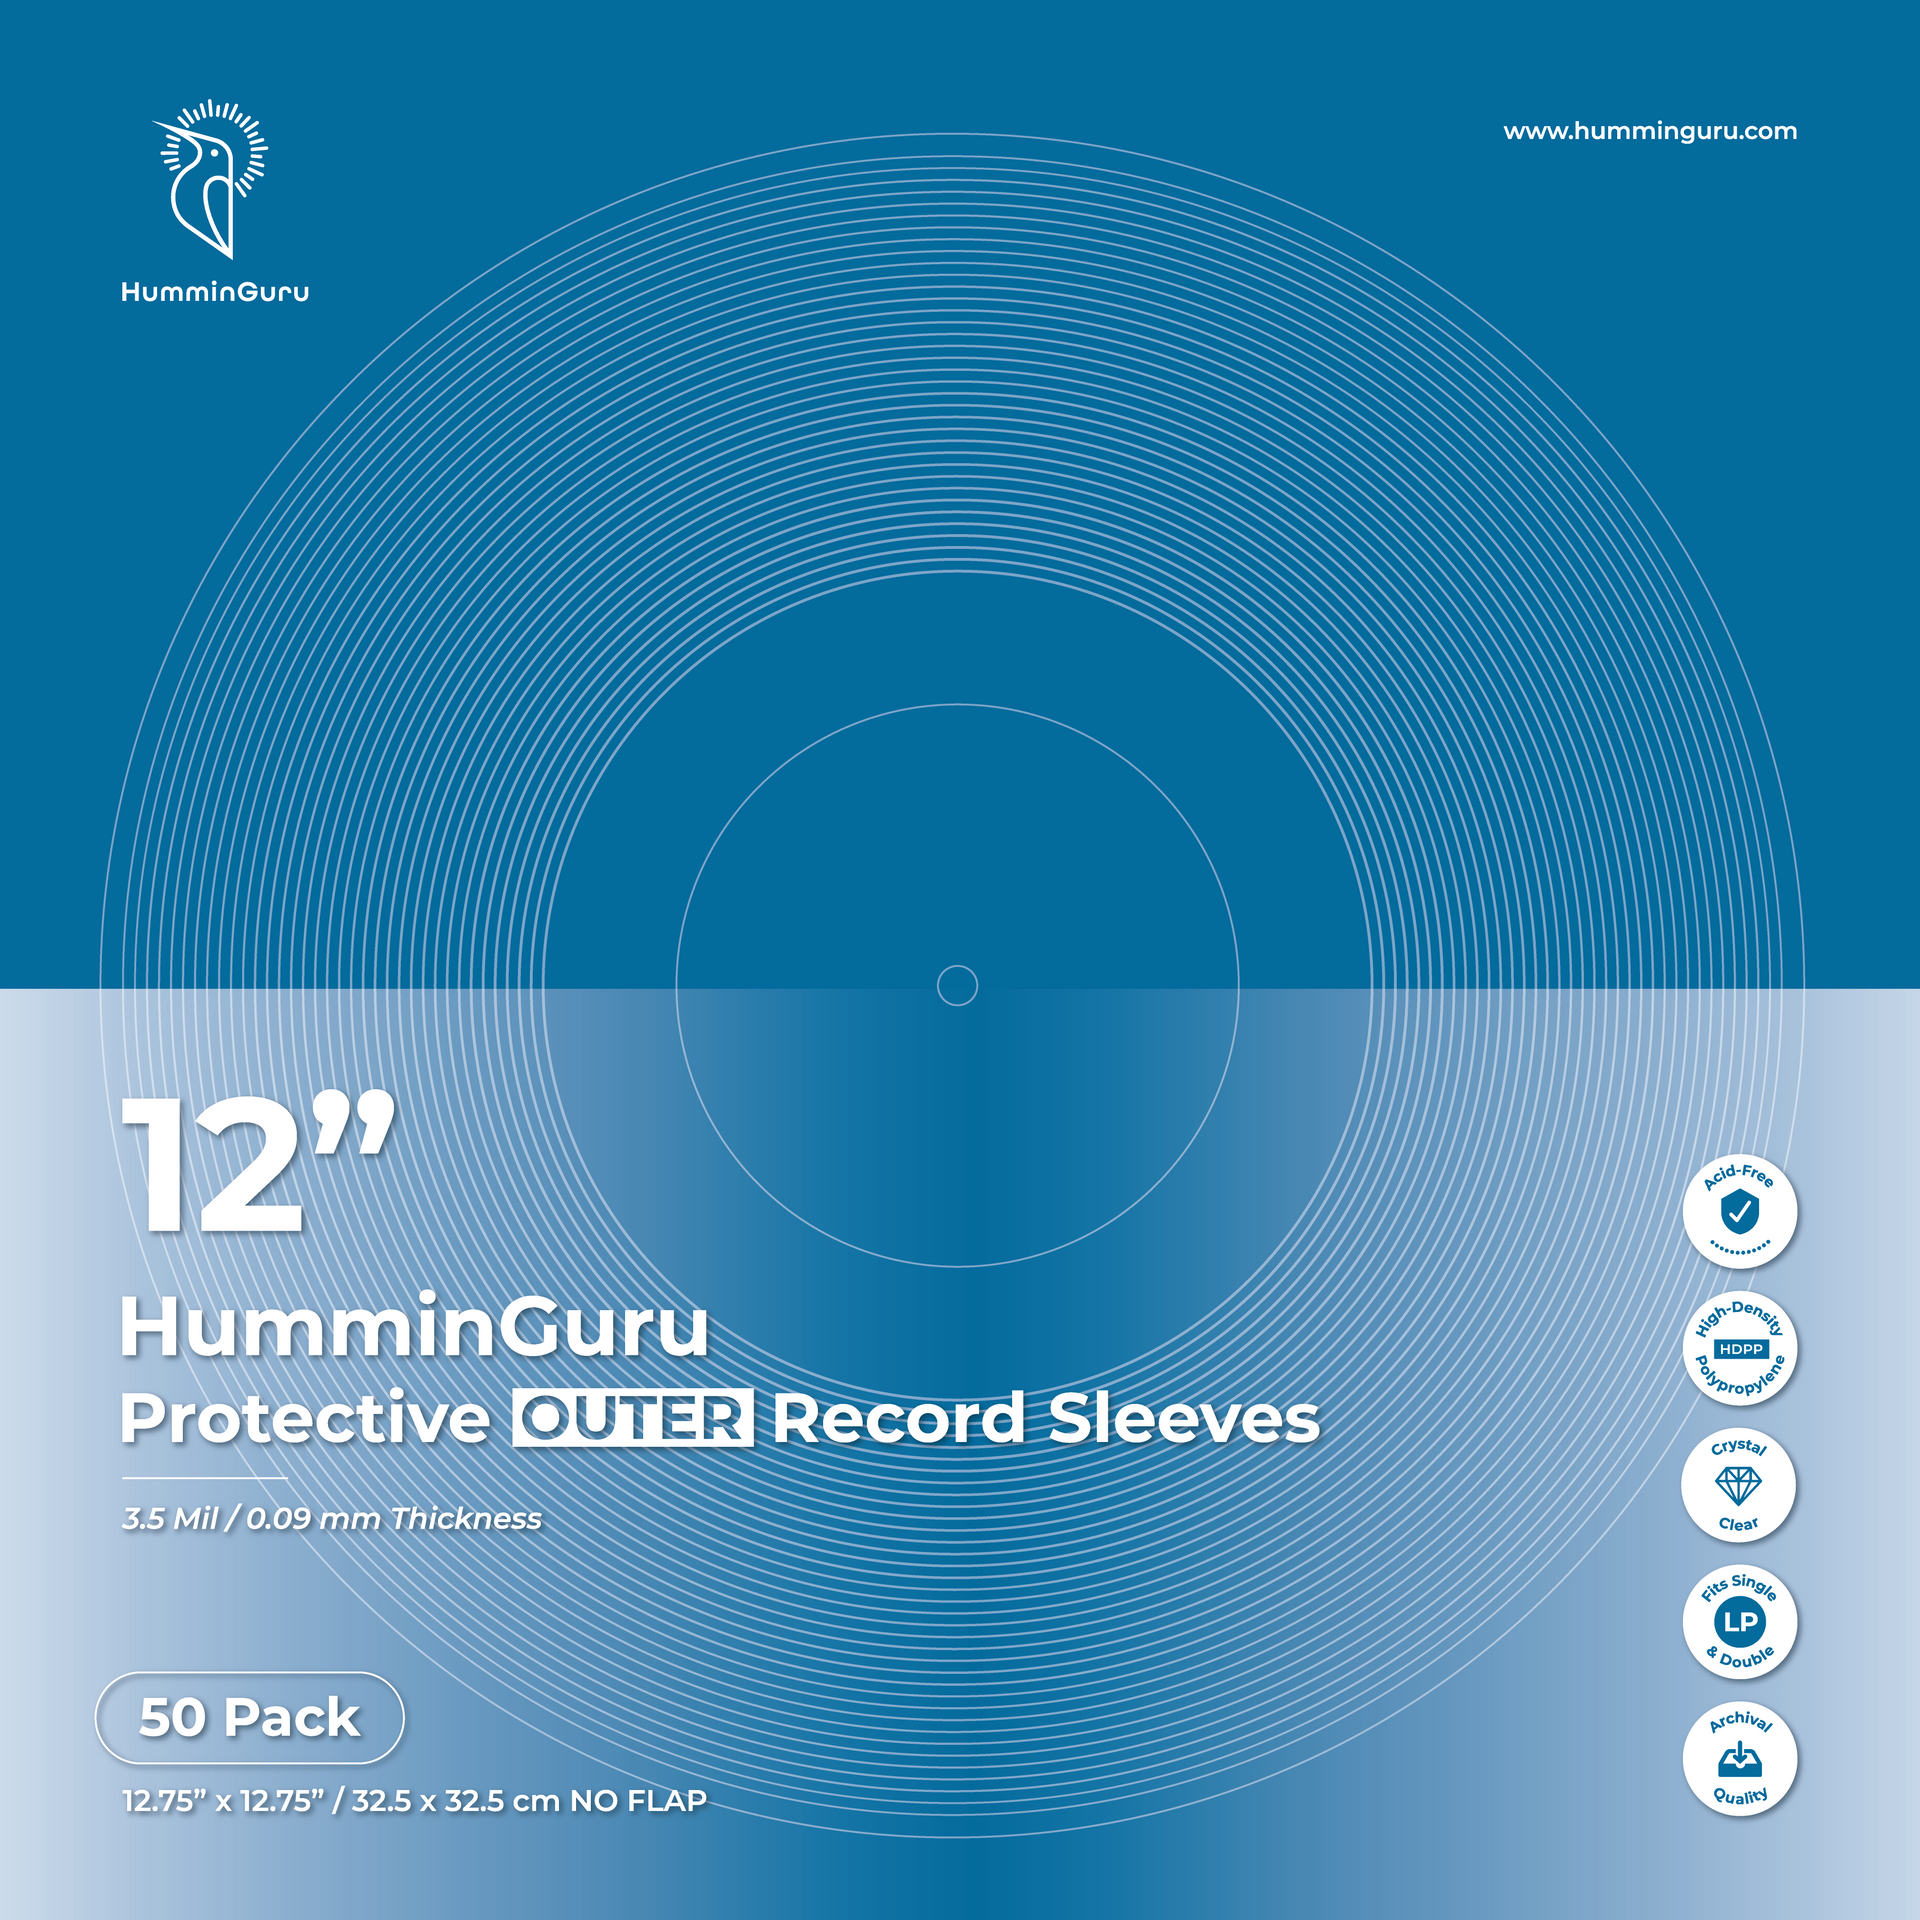 GUDGI Vinyl Record Outer Sleeves, 12 Clear 2 Mil Thick Protective LP Outer  Sleeves Wrinkle Free Vinyl Record Sleeves to Protect Your LP Collection